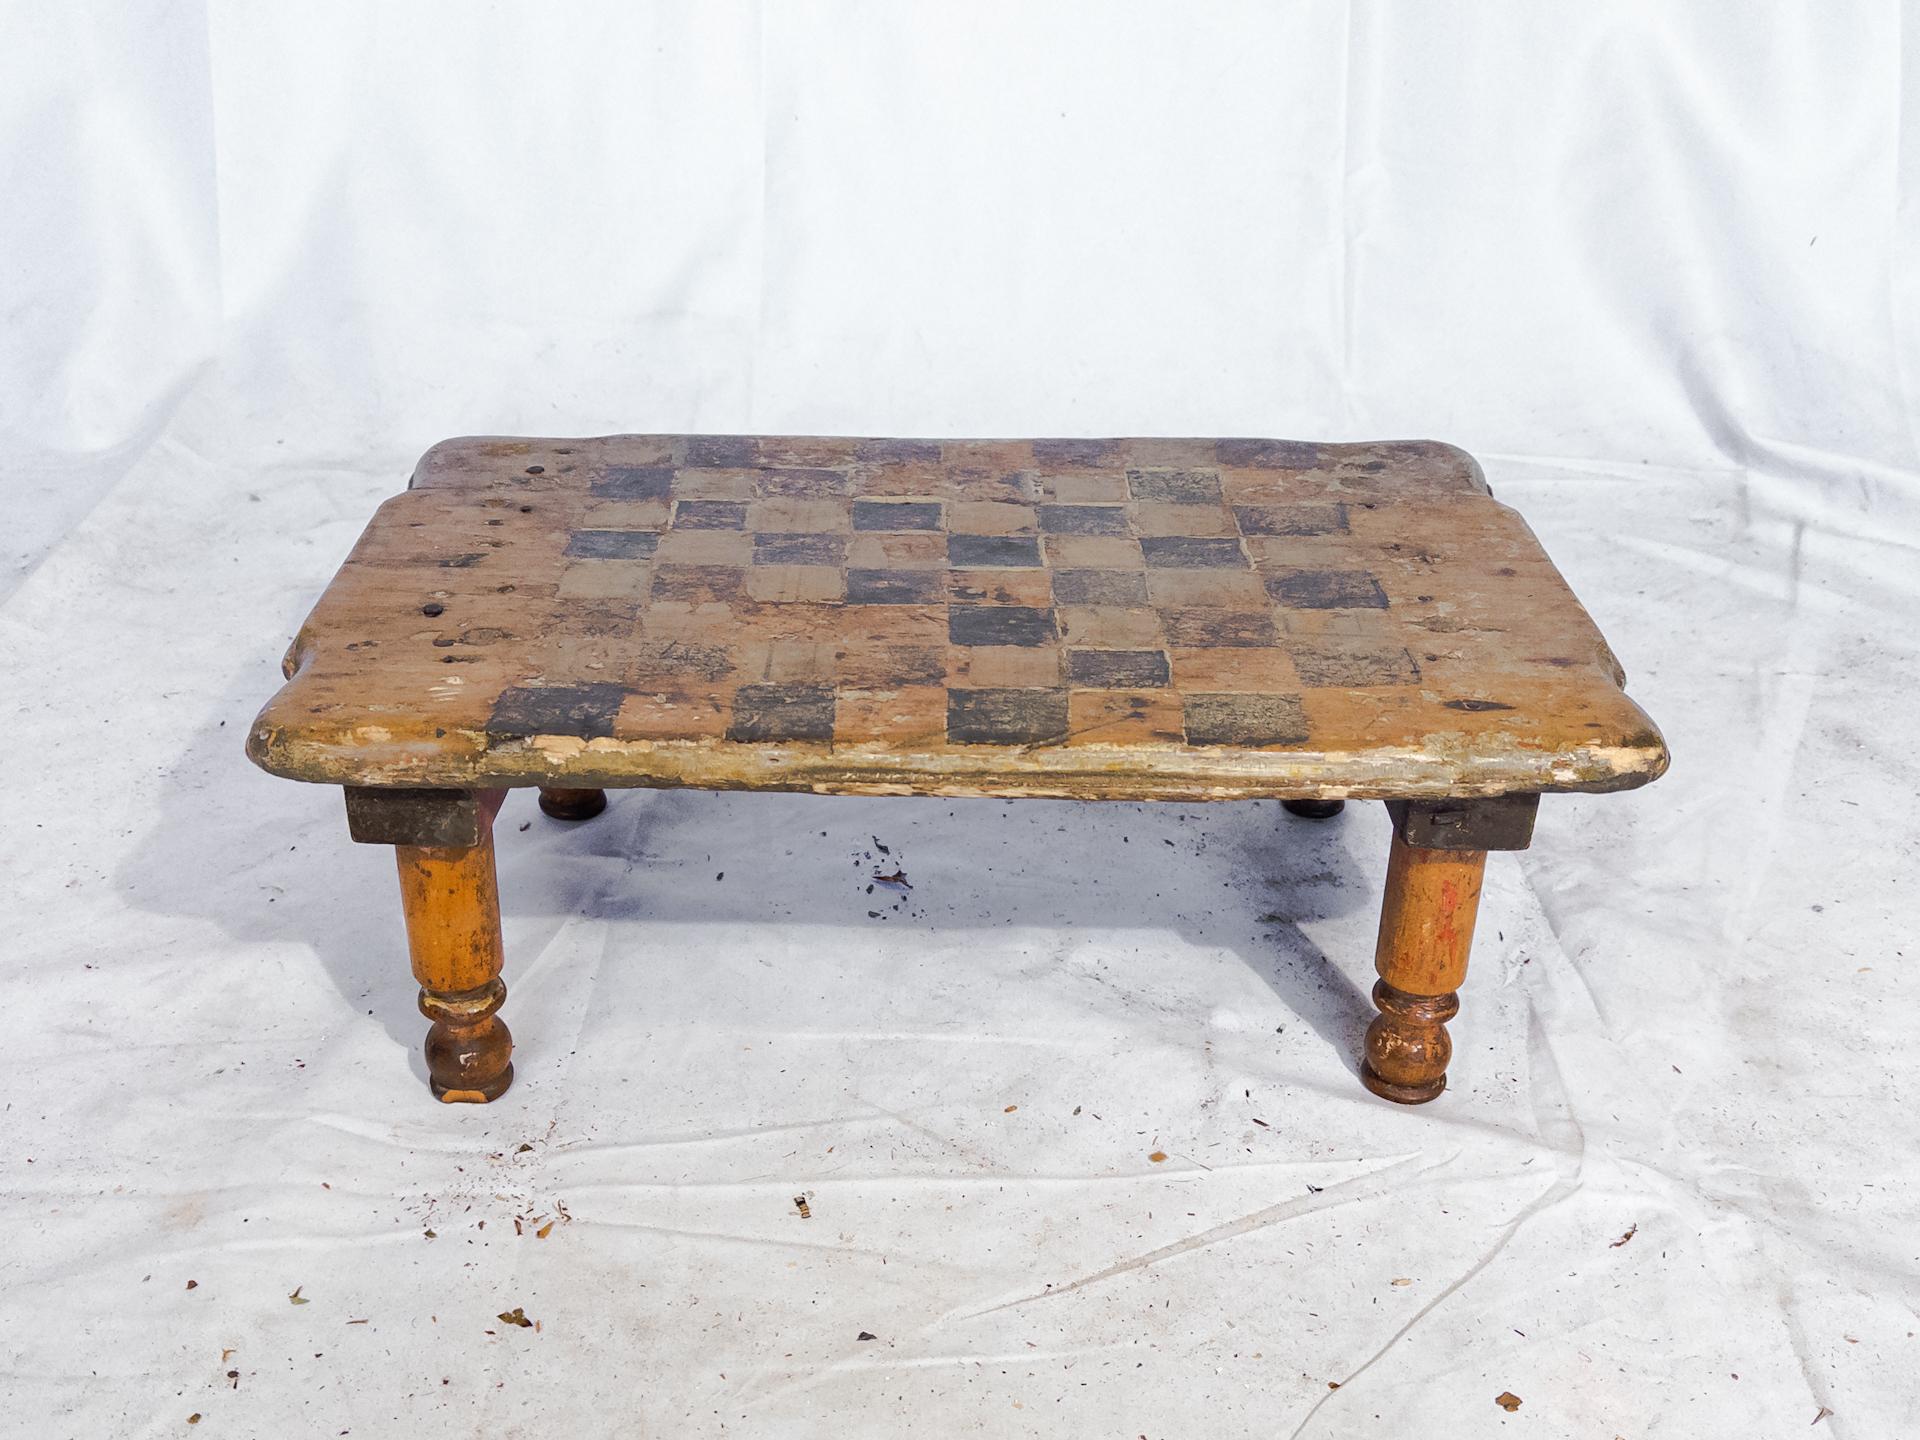 The Antique Small Checkerboard Table/Chess Board is a charming piece sourced from New England, boasting a rich history and timeless elegance. Standing at a diminutive height of 6.5 inches, this table exudes quaintness and craftsmanship. Its compact